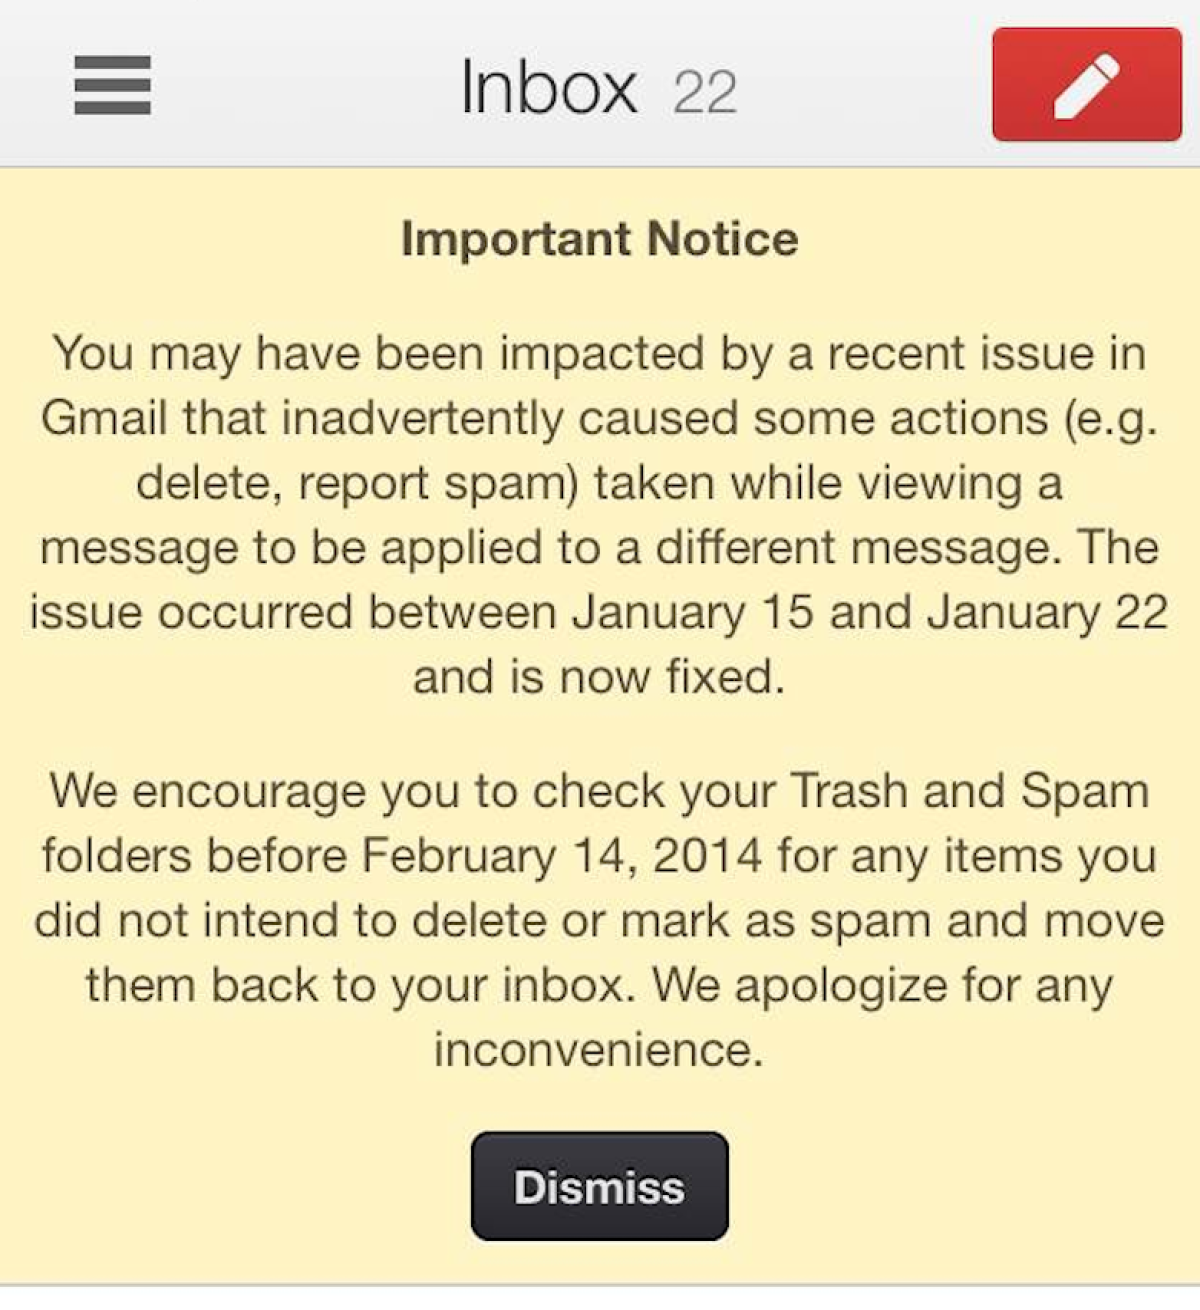 Google recently sent notices to numerous Gmail users, letting them know the service may have incorrectly categorized some of their messages.